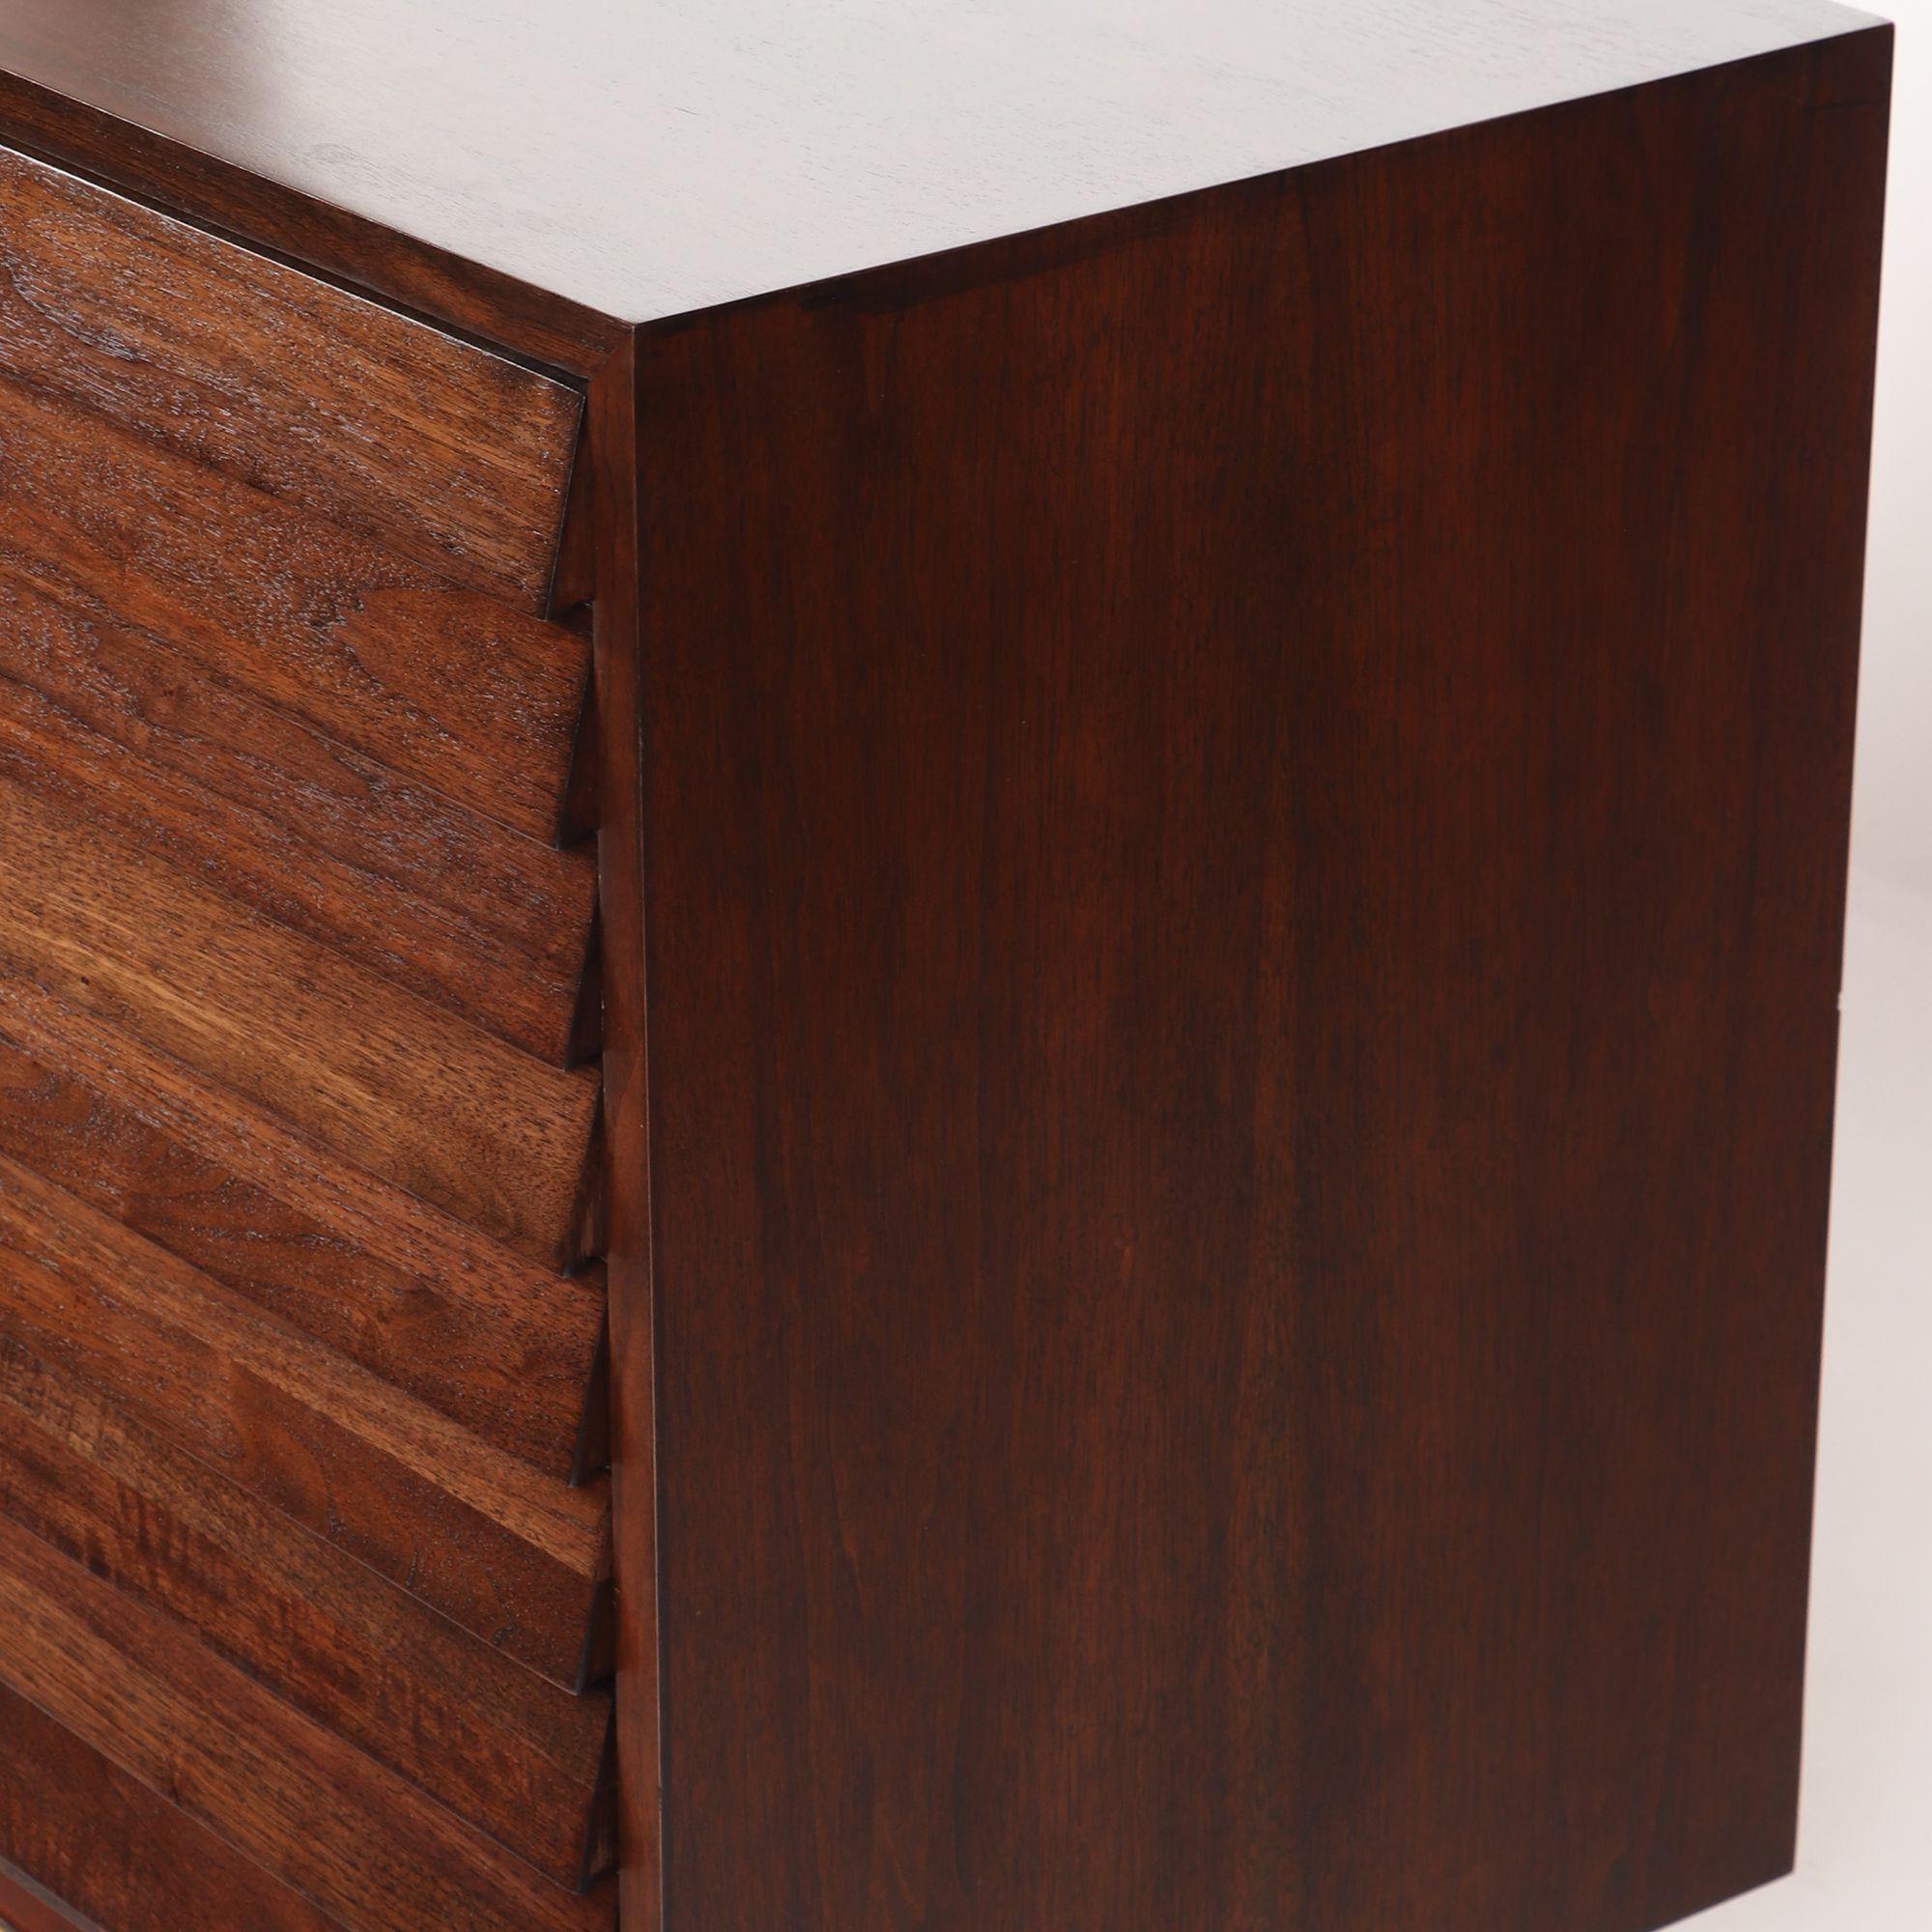 An American of Martinsville Merton Gershun Mid-Century Modern walnut dresser having three central drawers flanked on each side by three louvered drawers circa 1960.